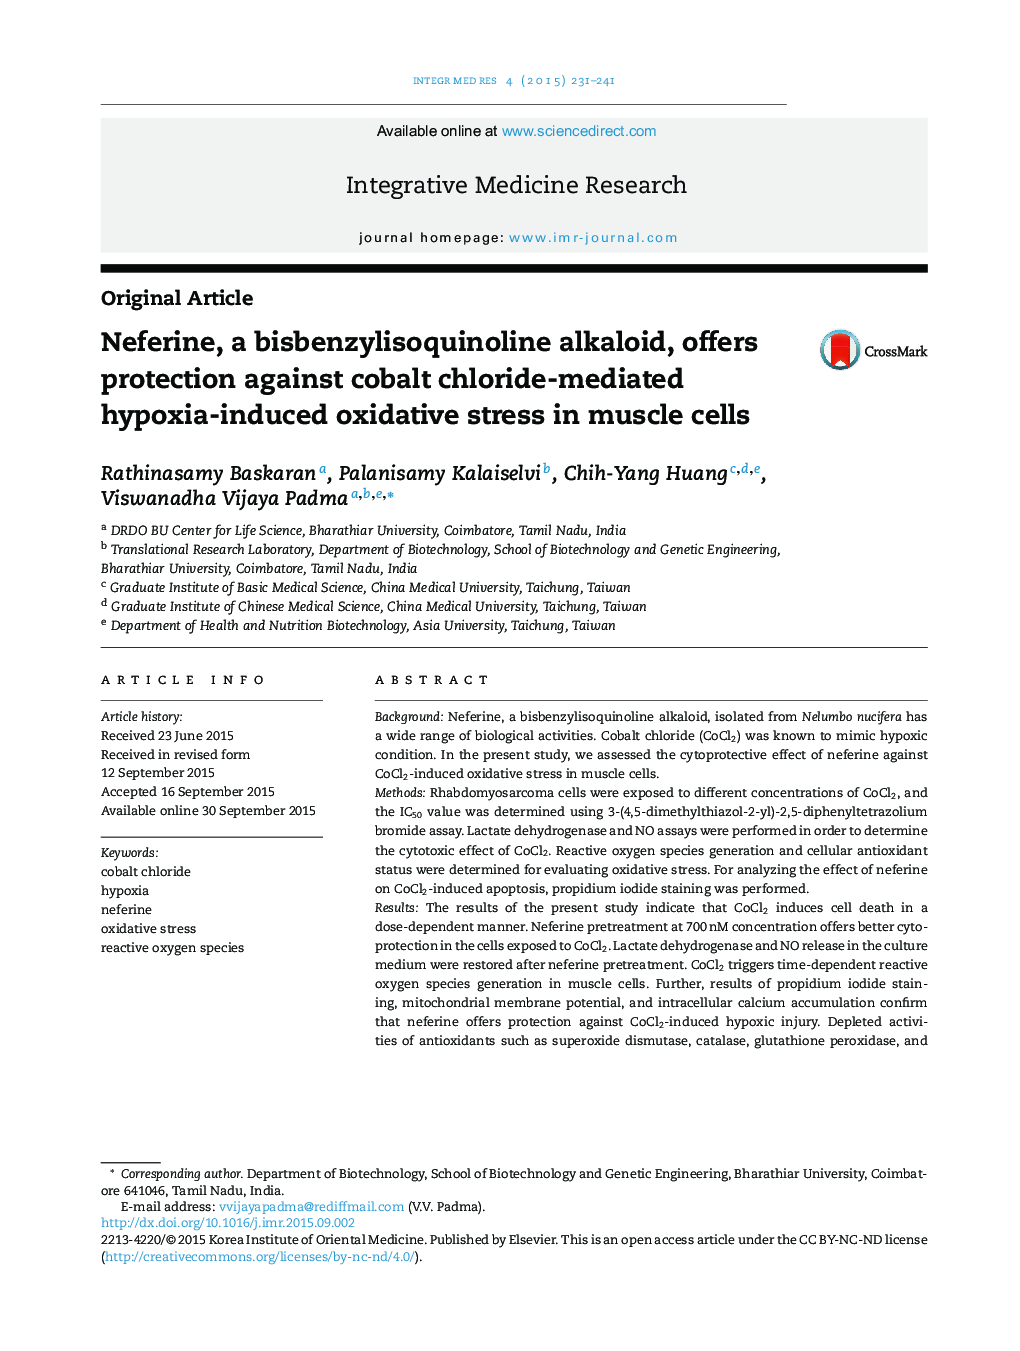 Neferine, a bisbenzylisoquinoline alkaloid, offers protection against cobalt chloride-mediated hypoxia-induced oxidative stress in muscle cells